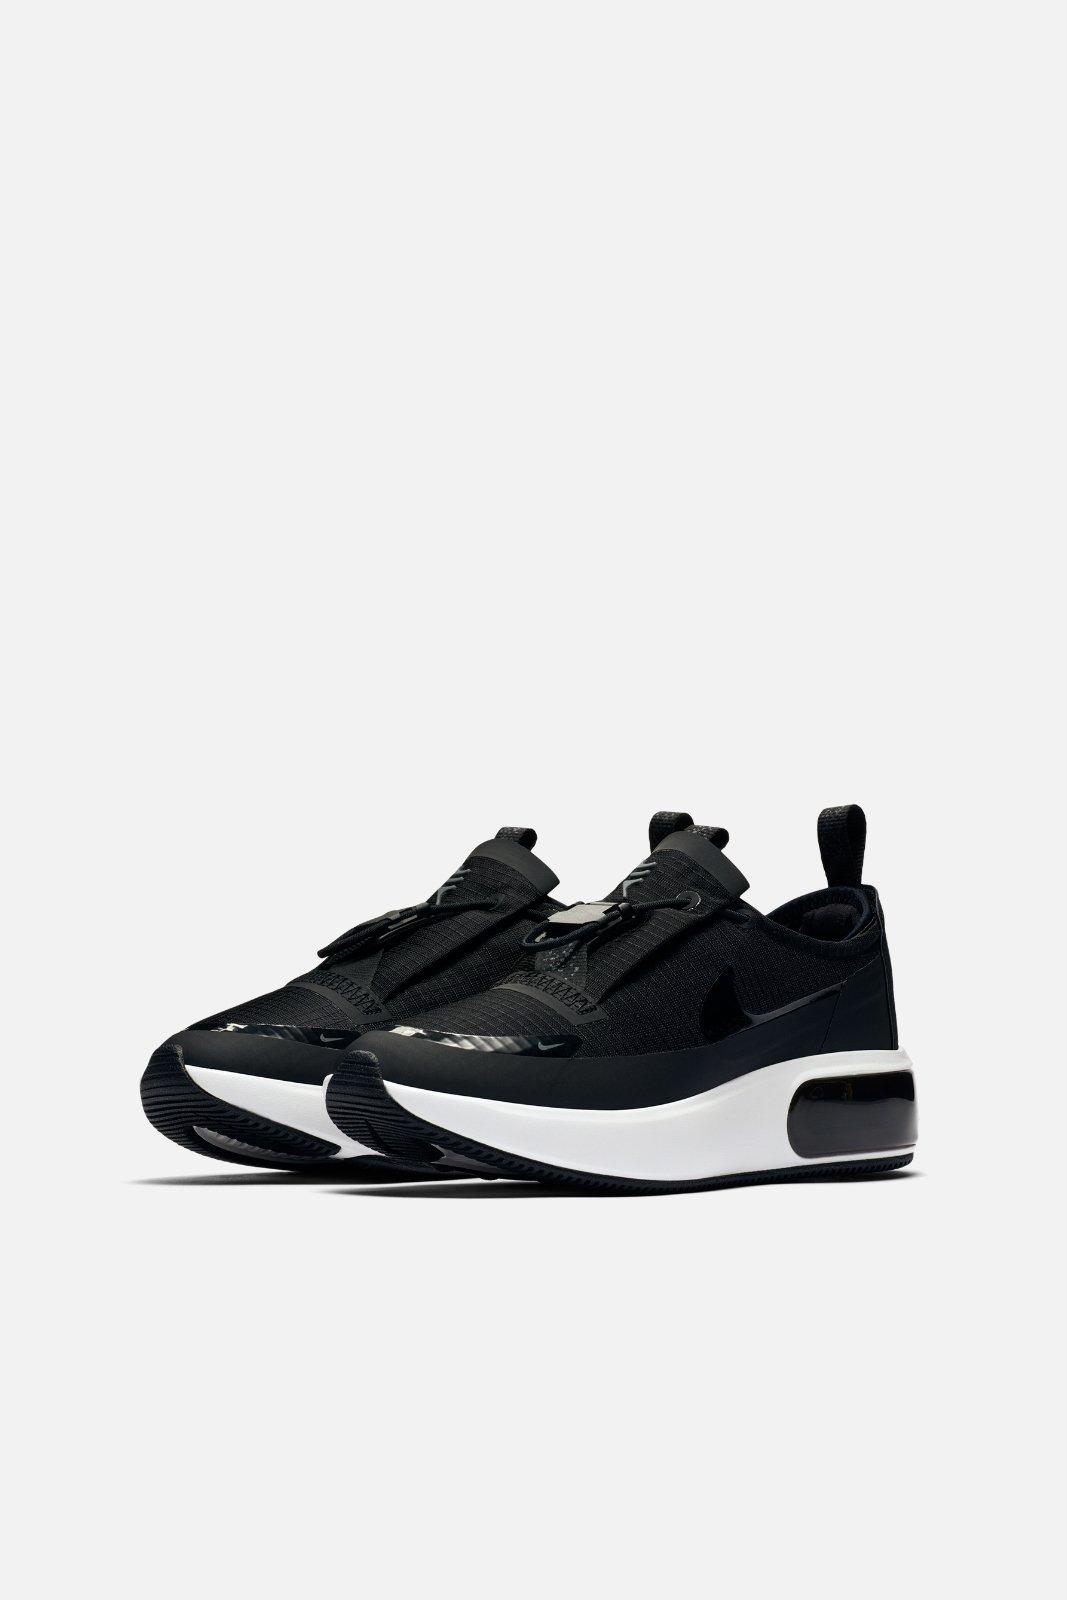 nike black and grey winter air max dia trainers